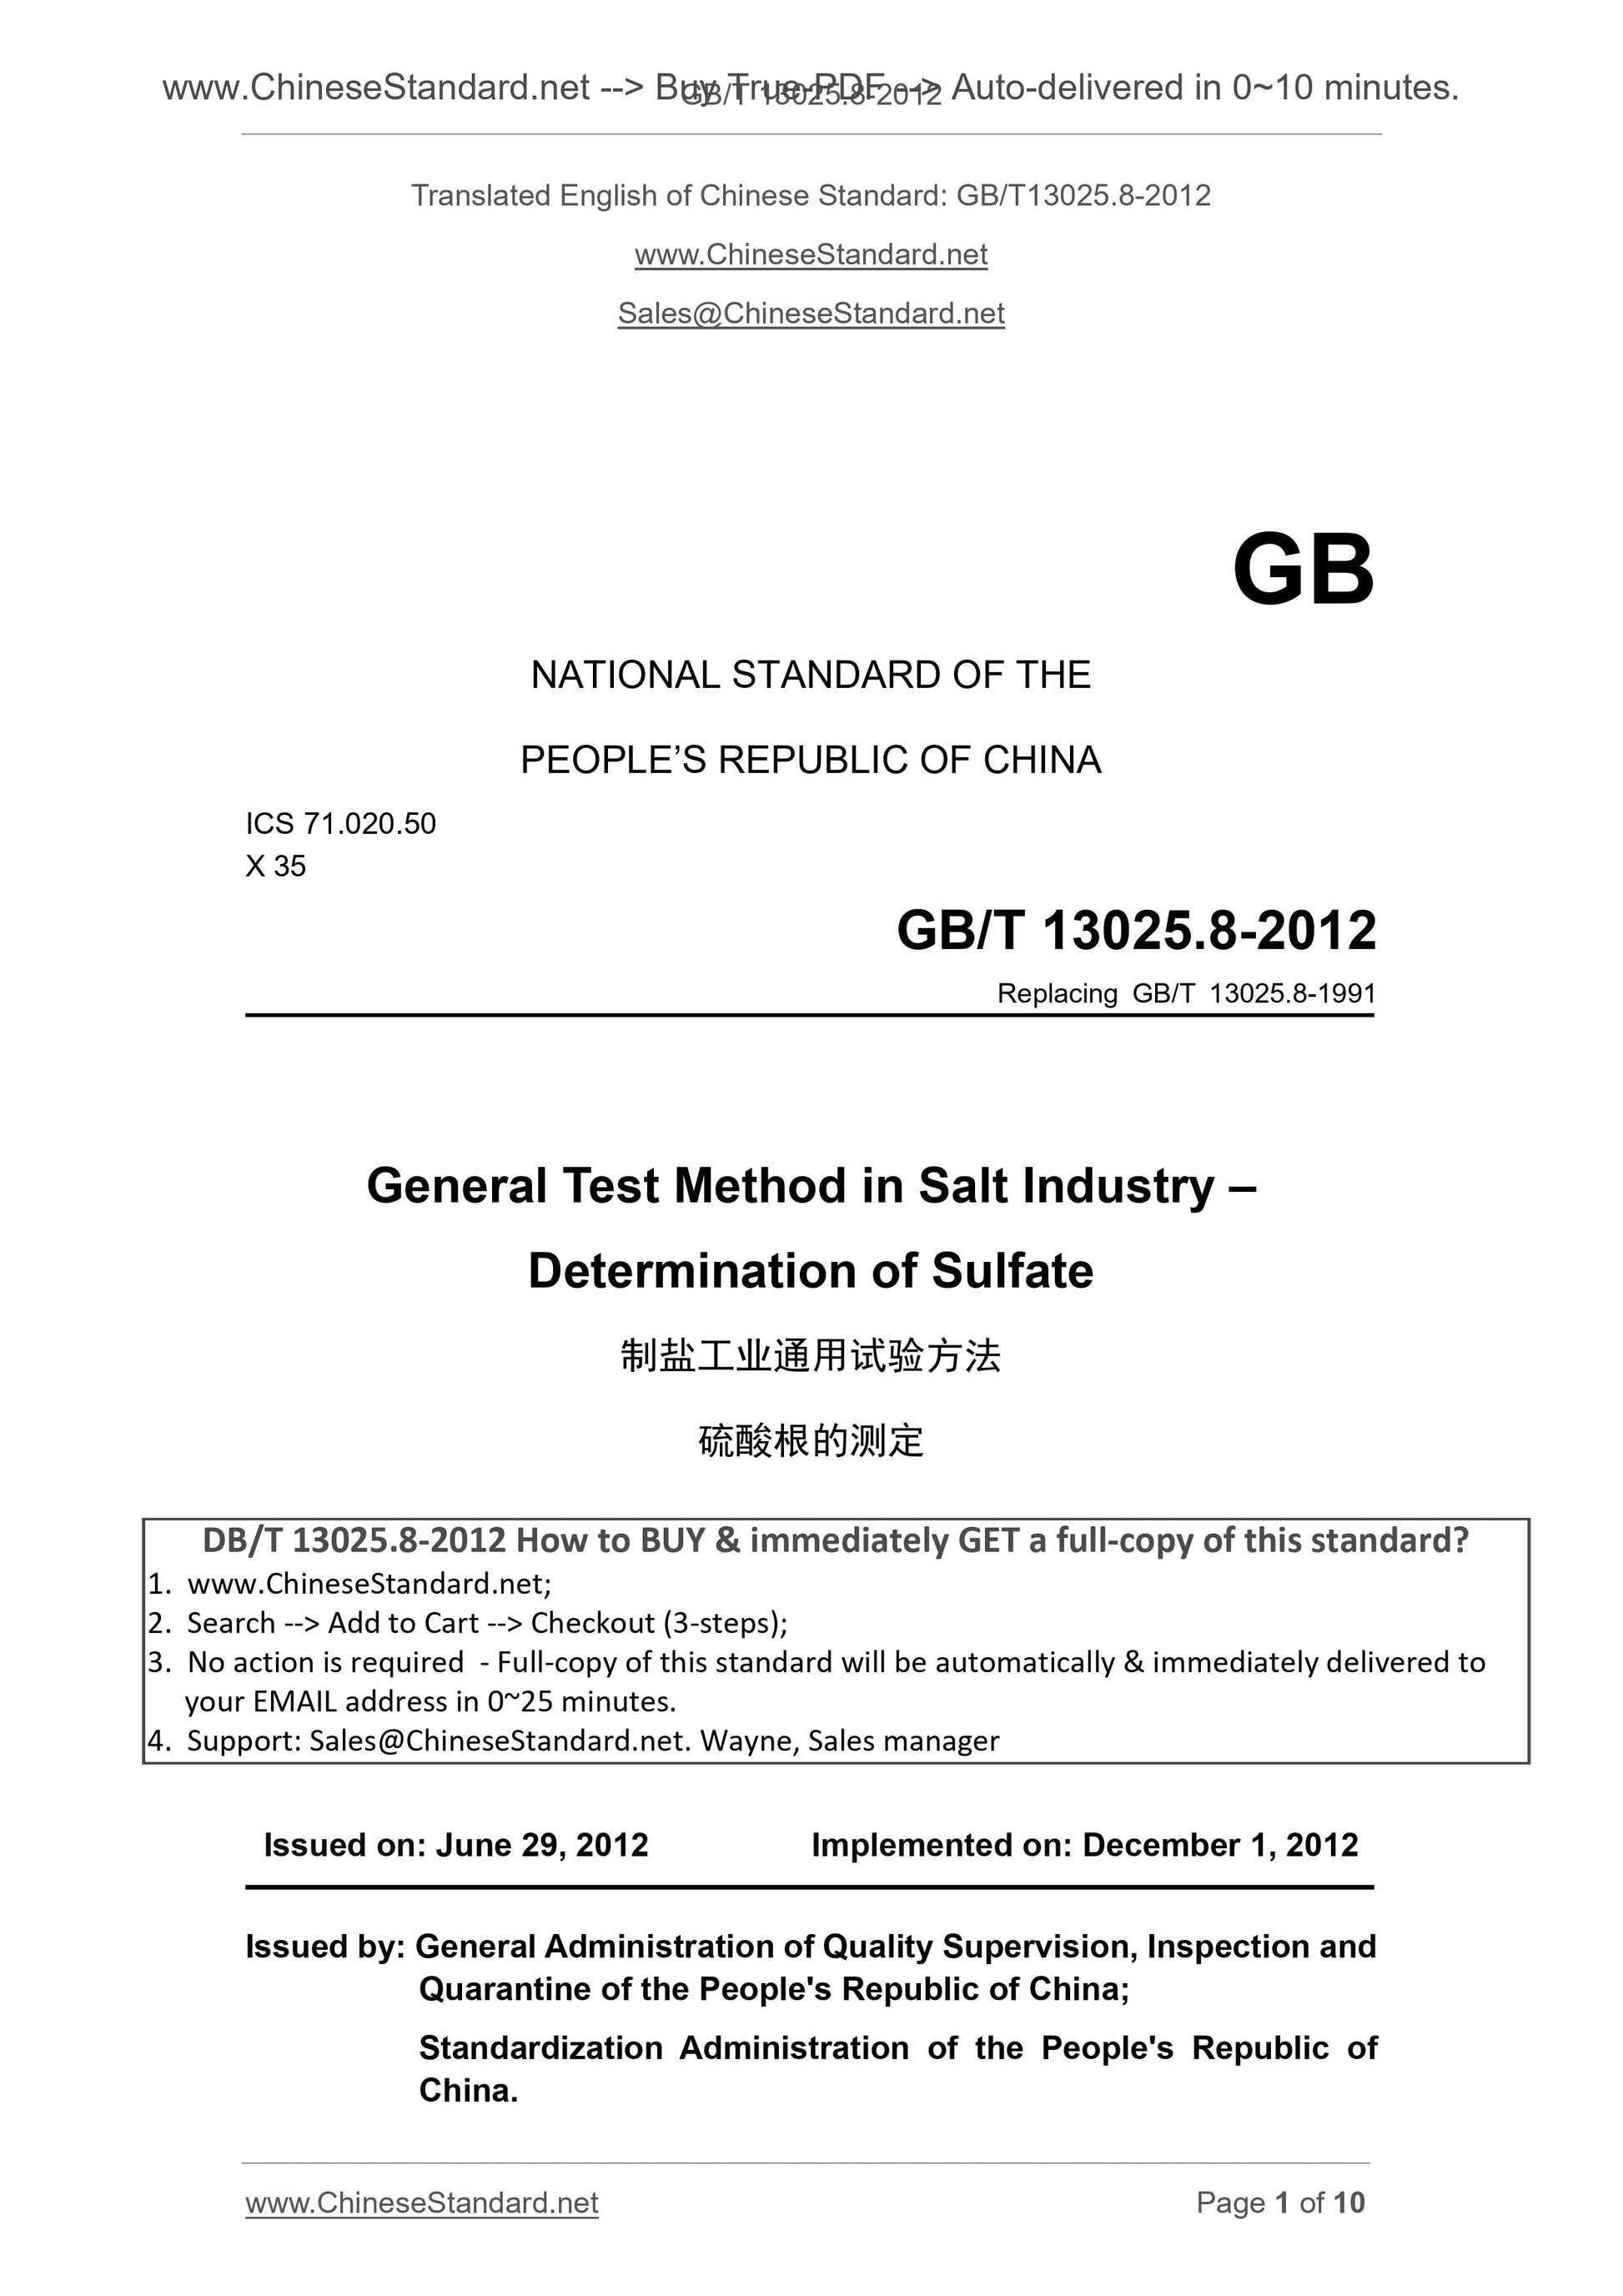 GB/T 13025.8-2012 Page 1